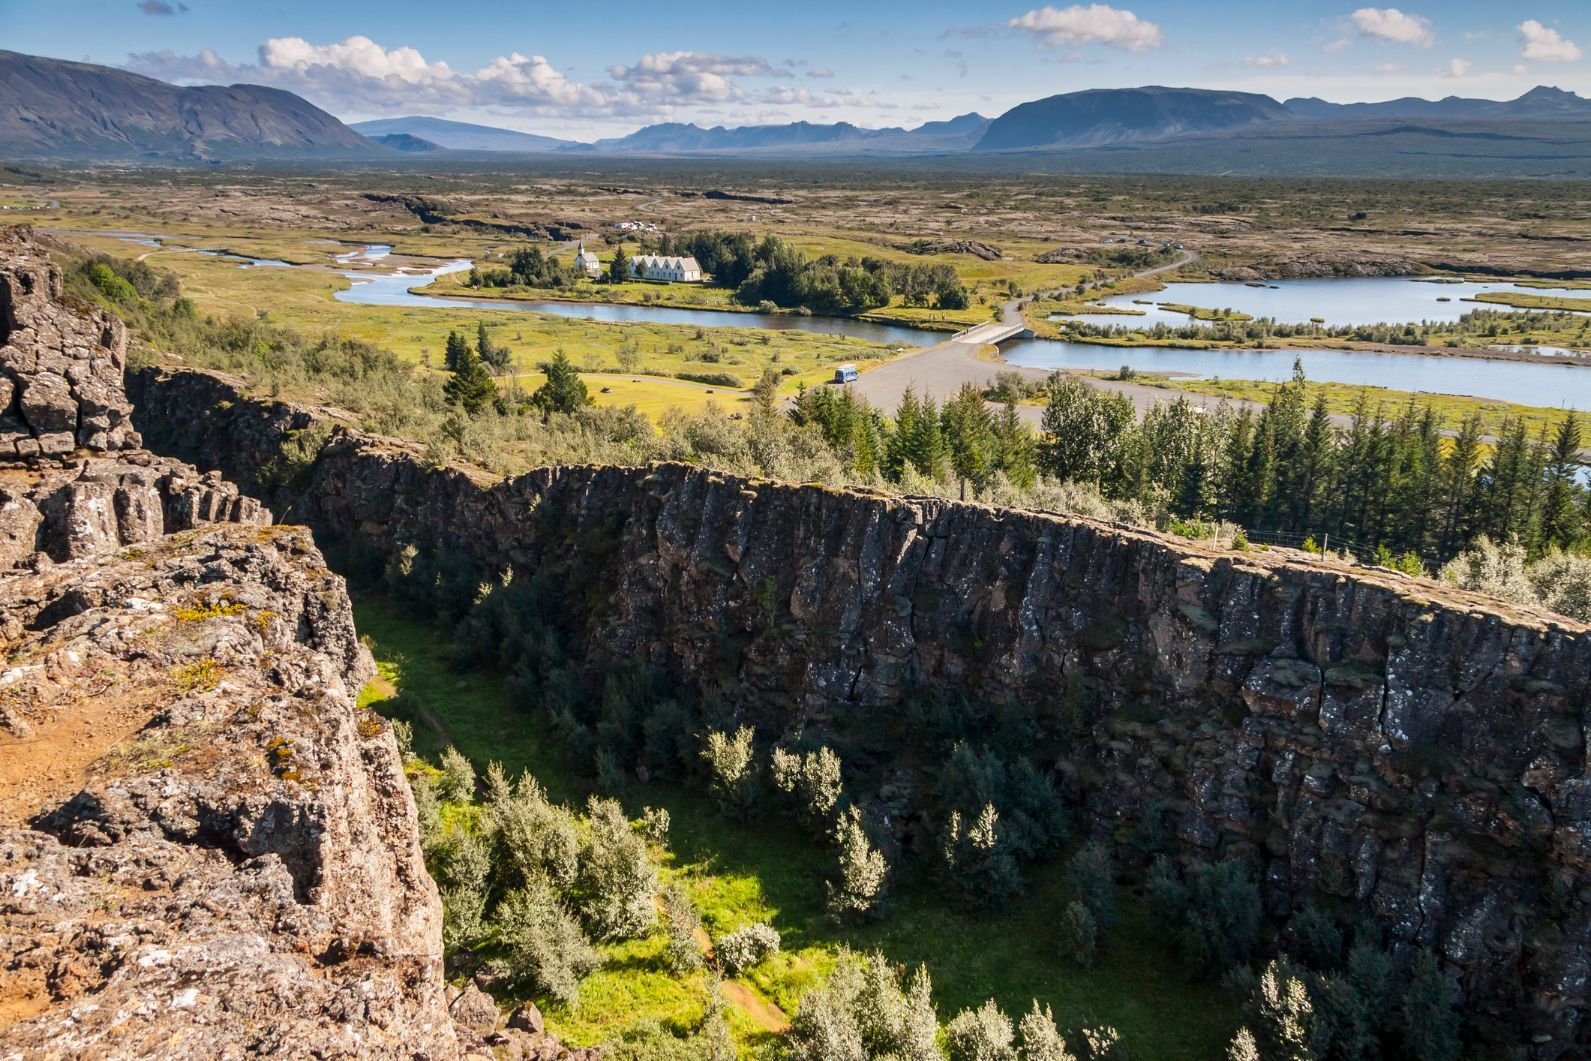 The remarkable Thingvellir valley in Iceland and the seam between the Eurasian and North American tectonic plates